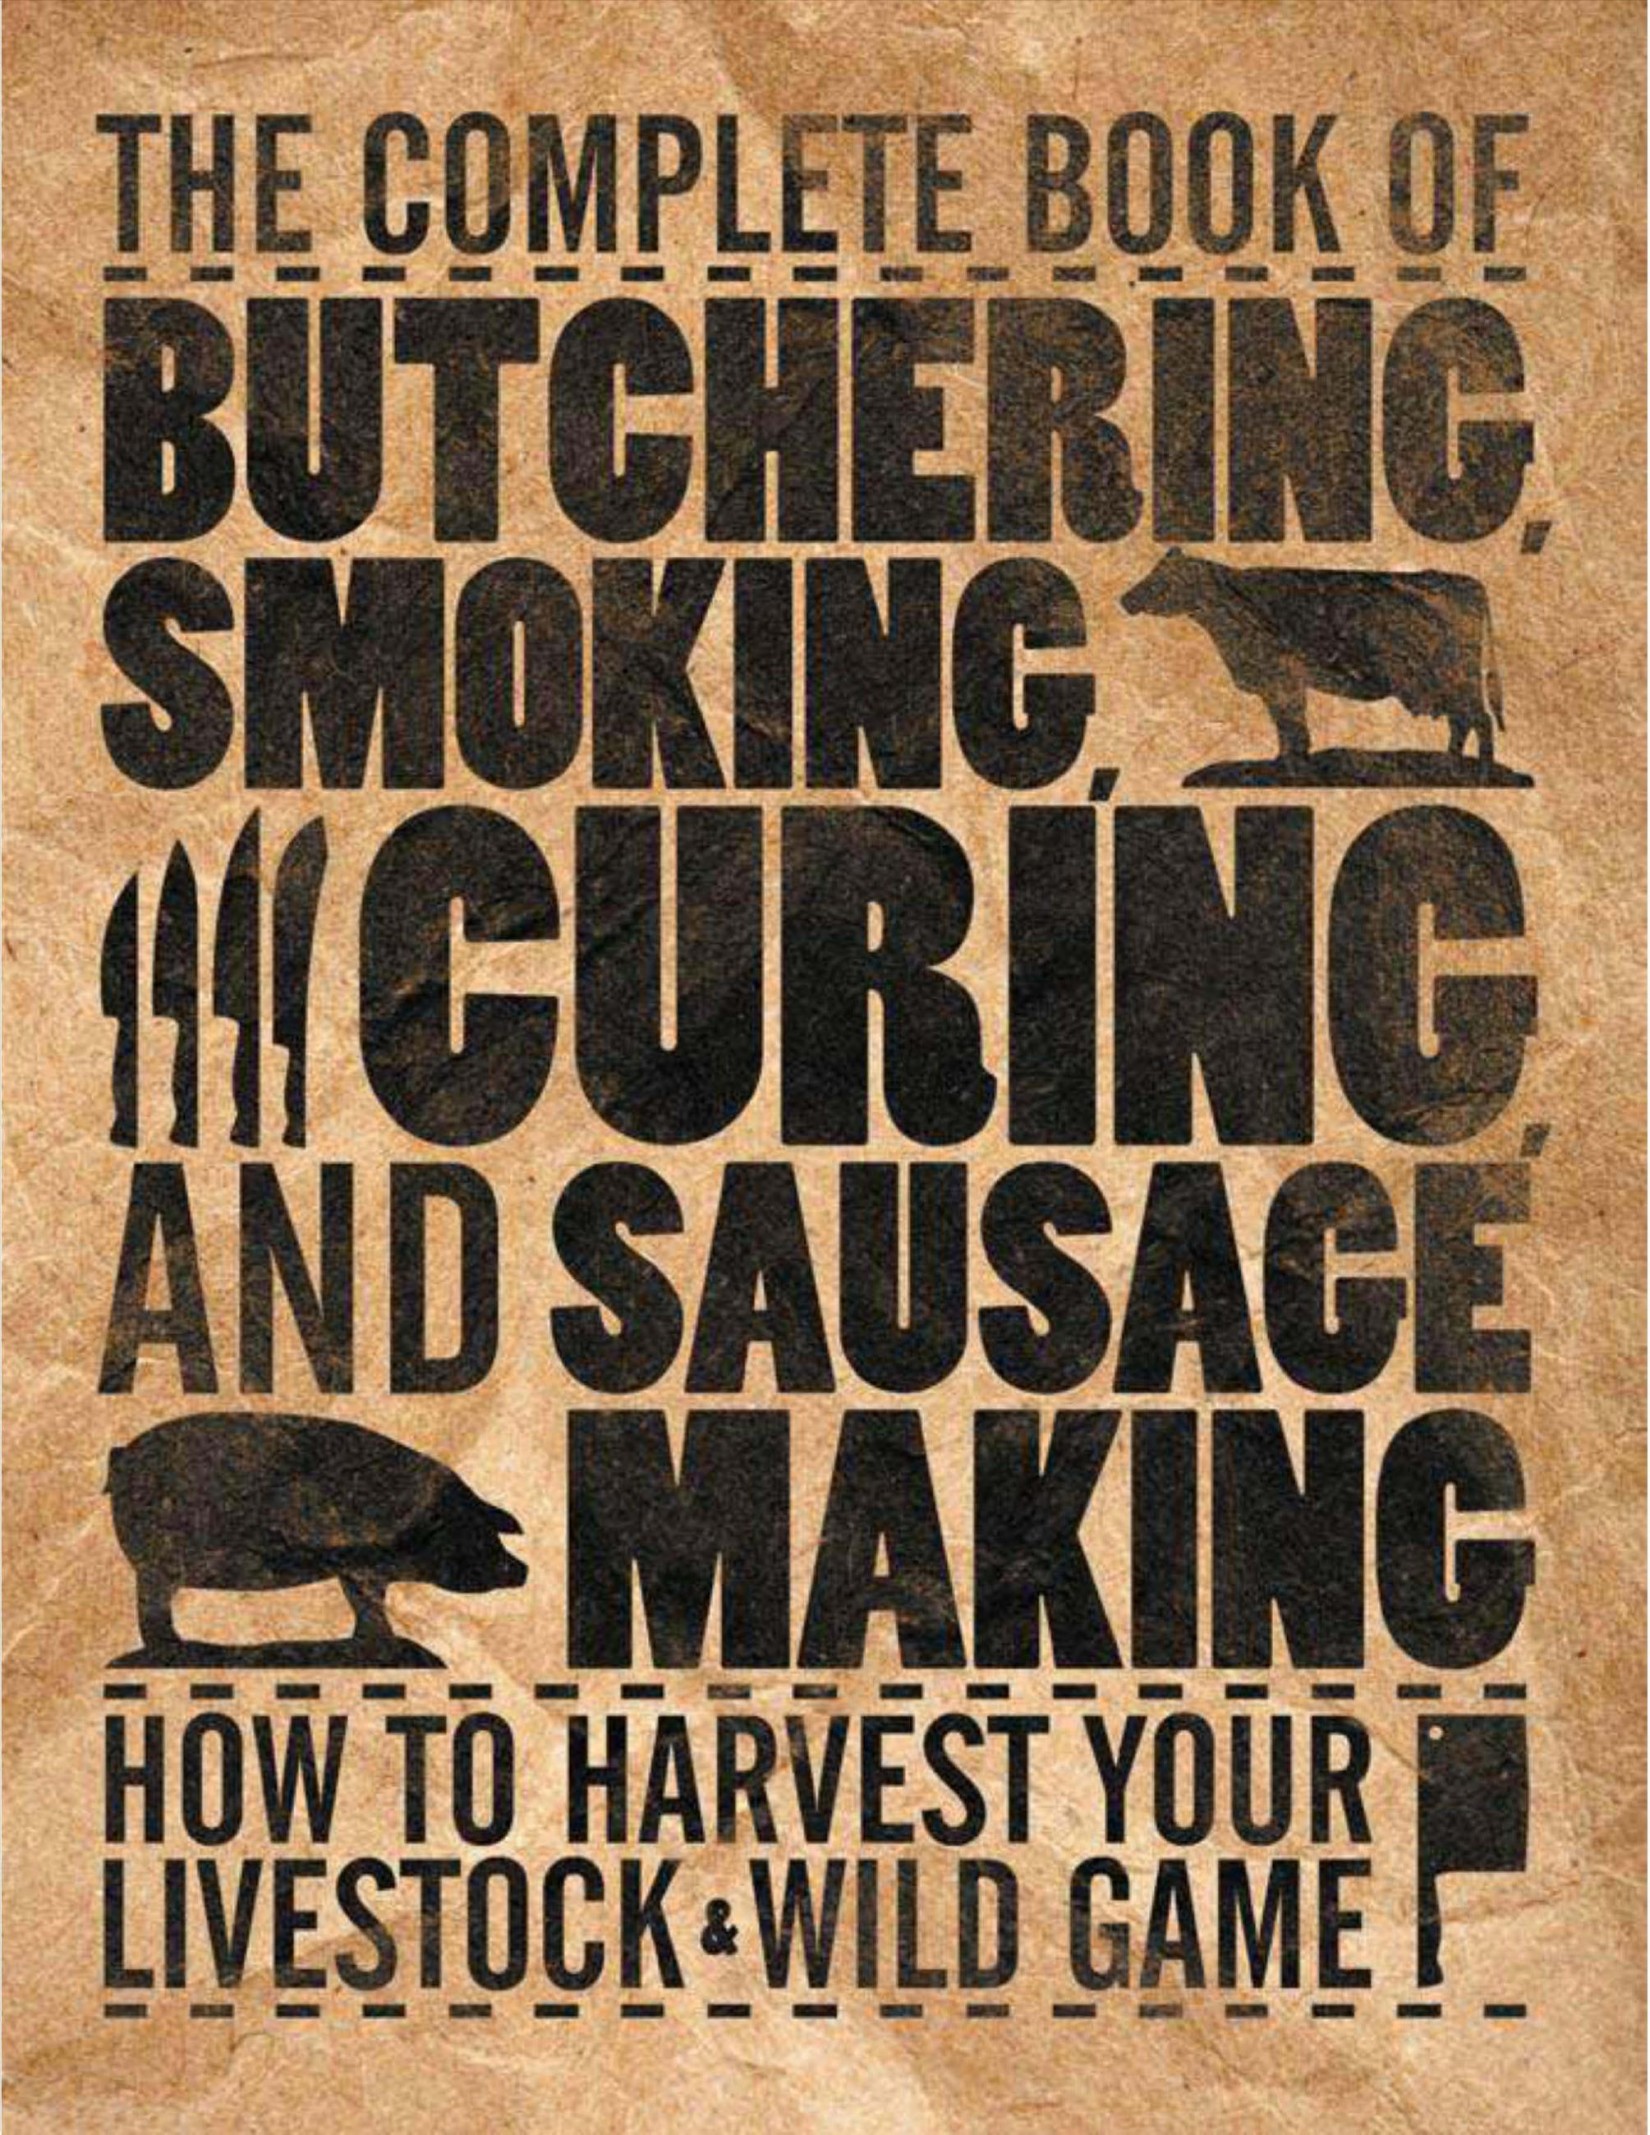 The Complete Book of Butchering, Smoking, Curing, and Sausage Making  How to Harvest Your Livestock & Wild Game 2010